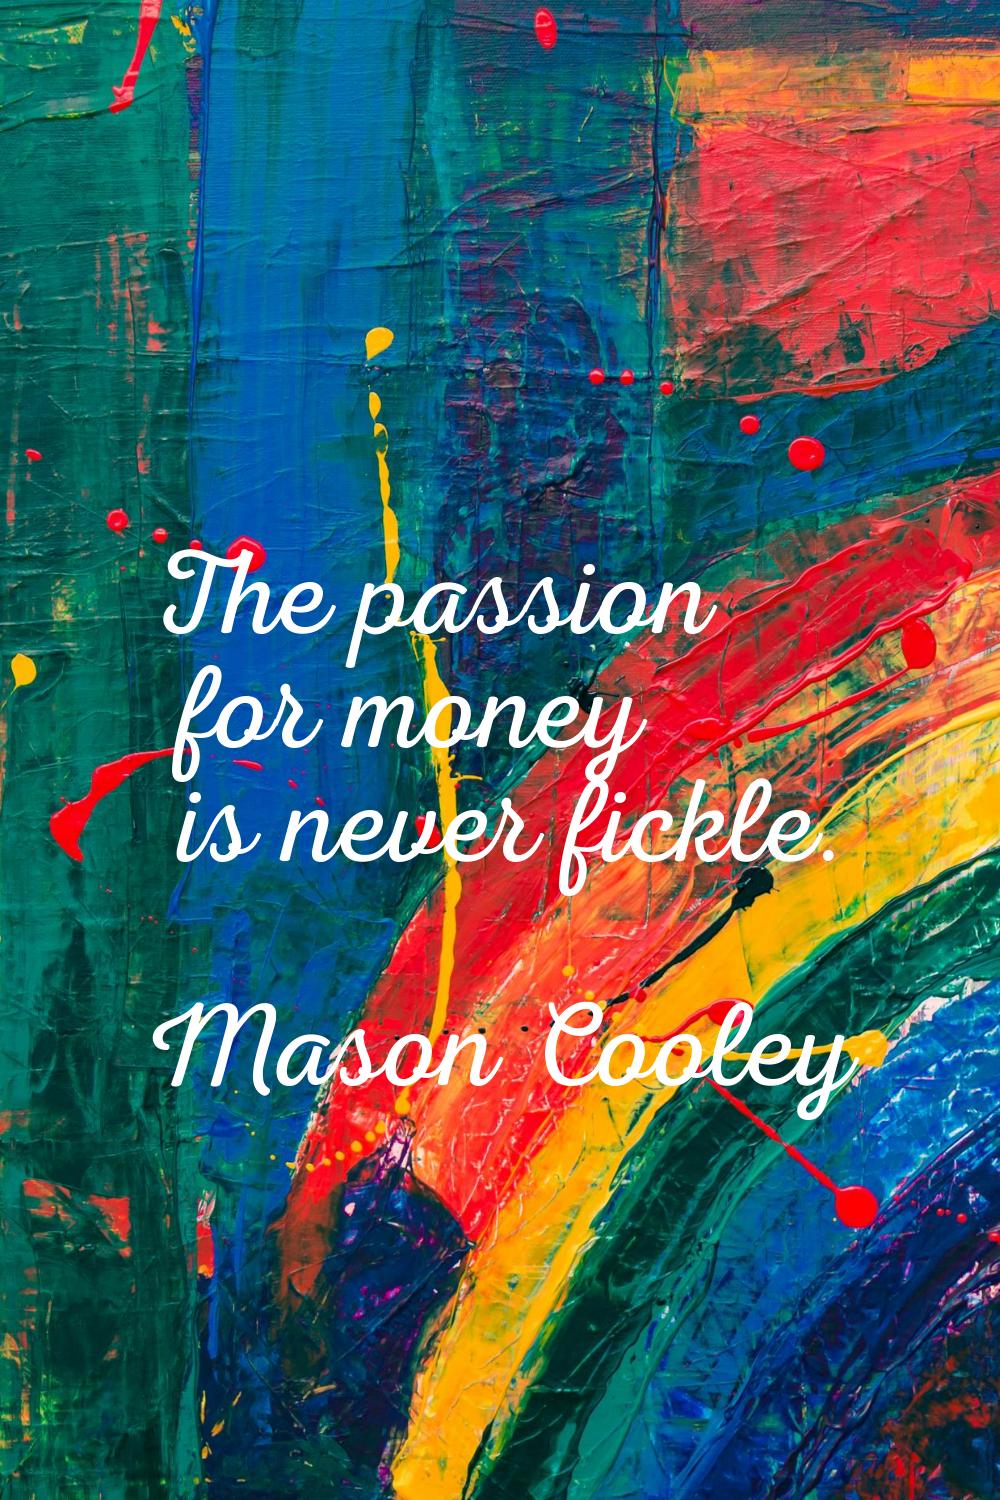 The passion for money is never fickle.